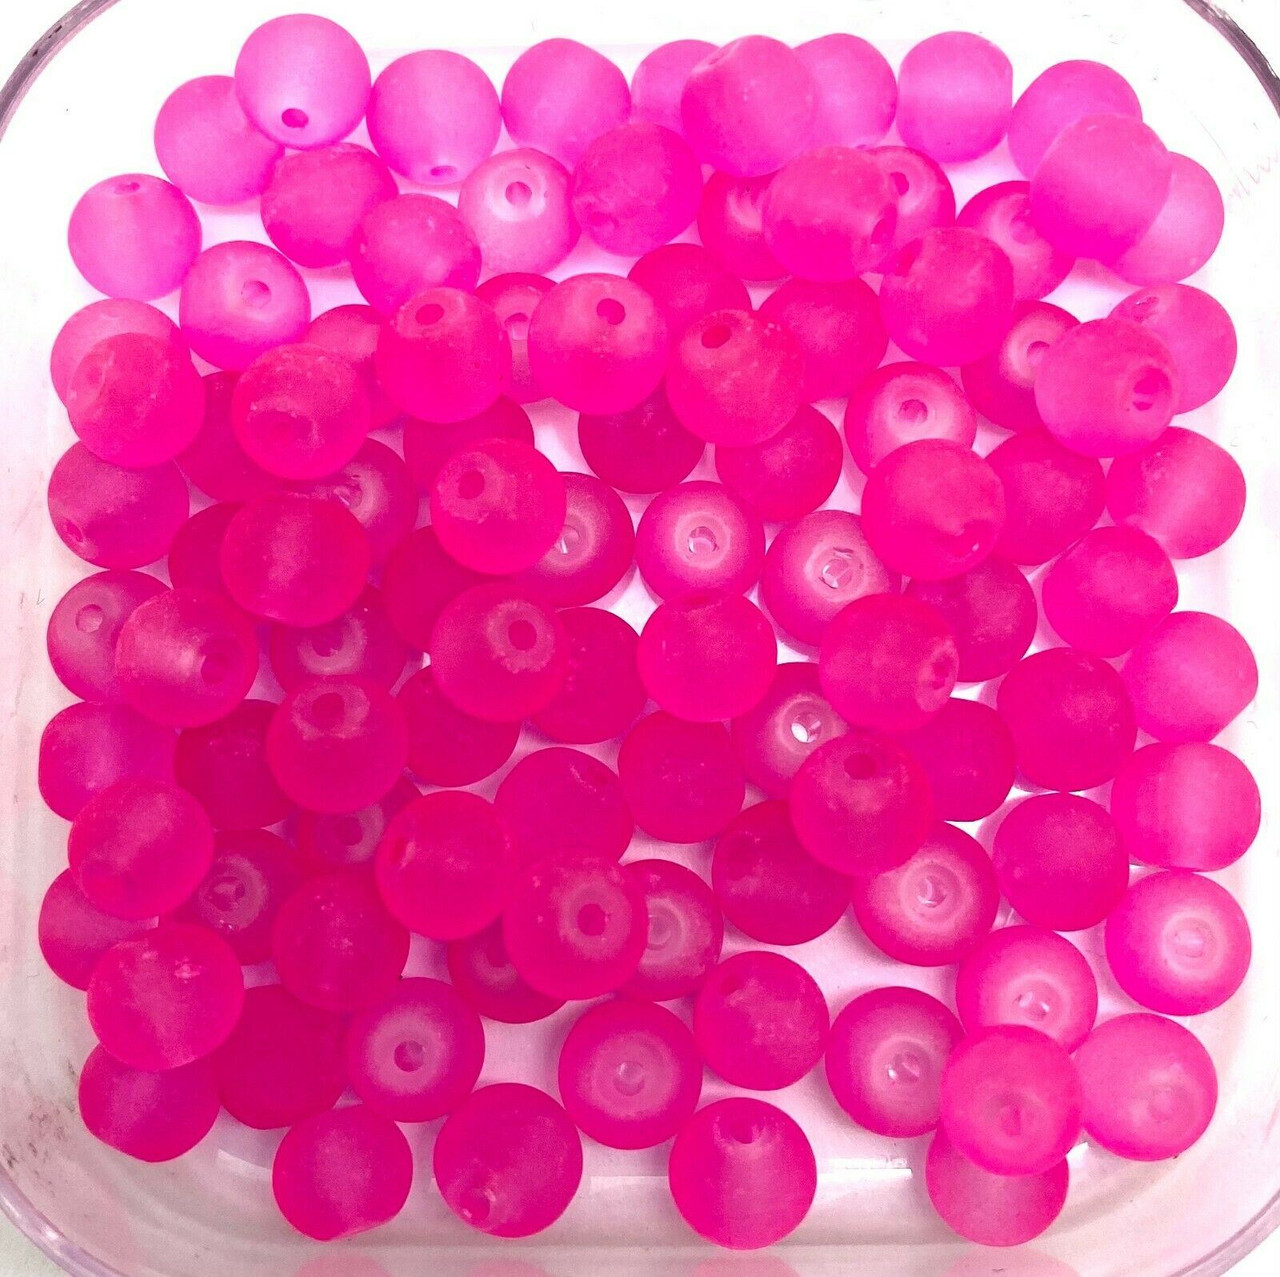 4mm Frosted Glass Beads - Bright Pink, approx 200 beads